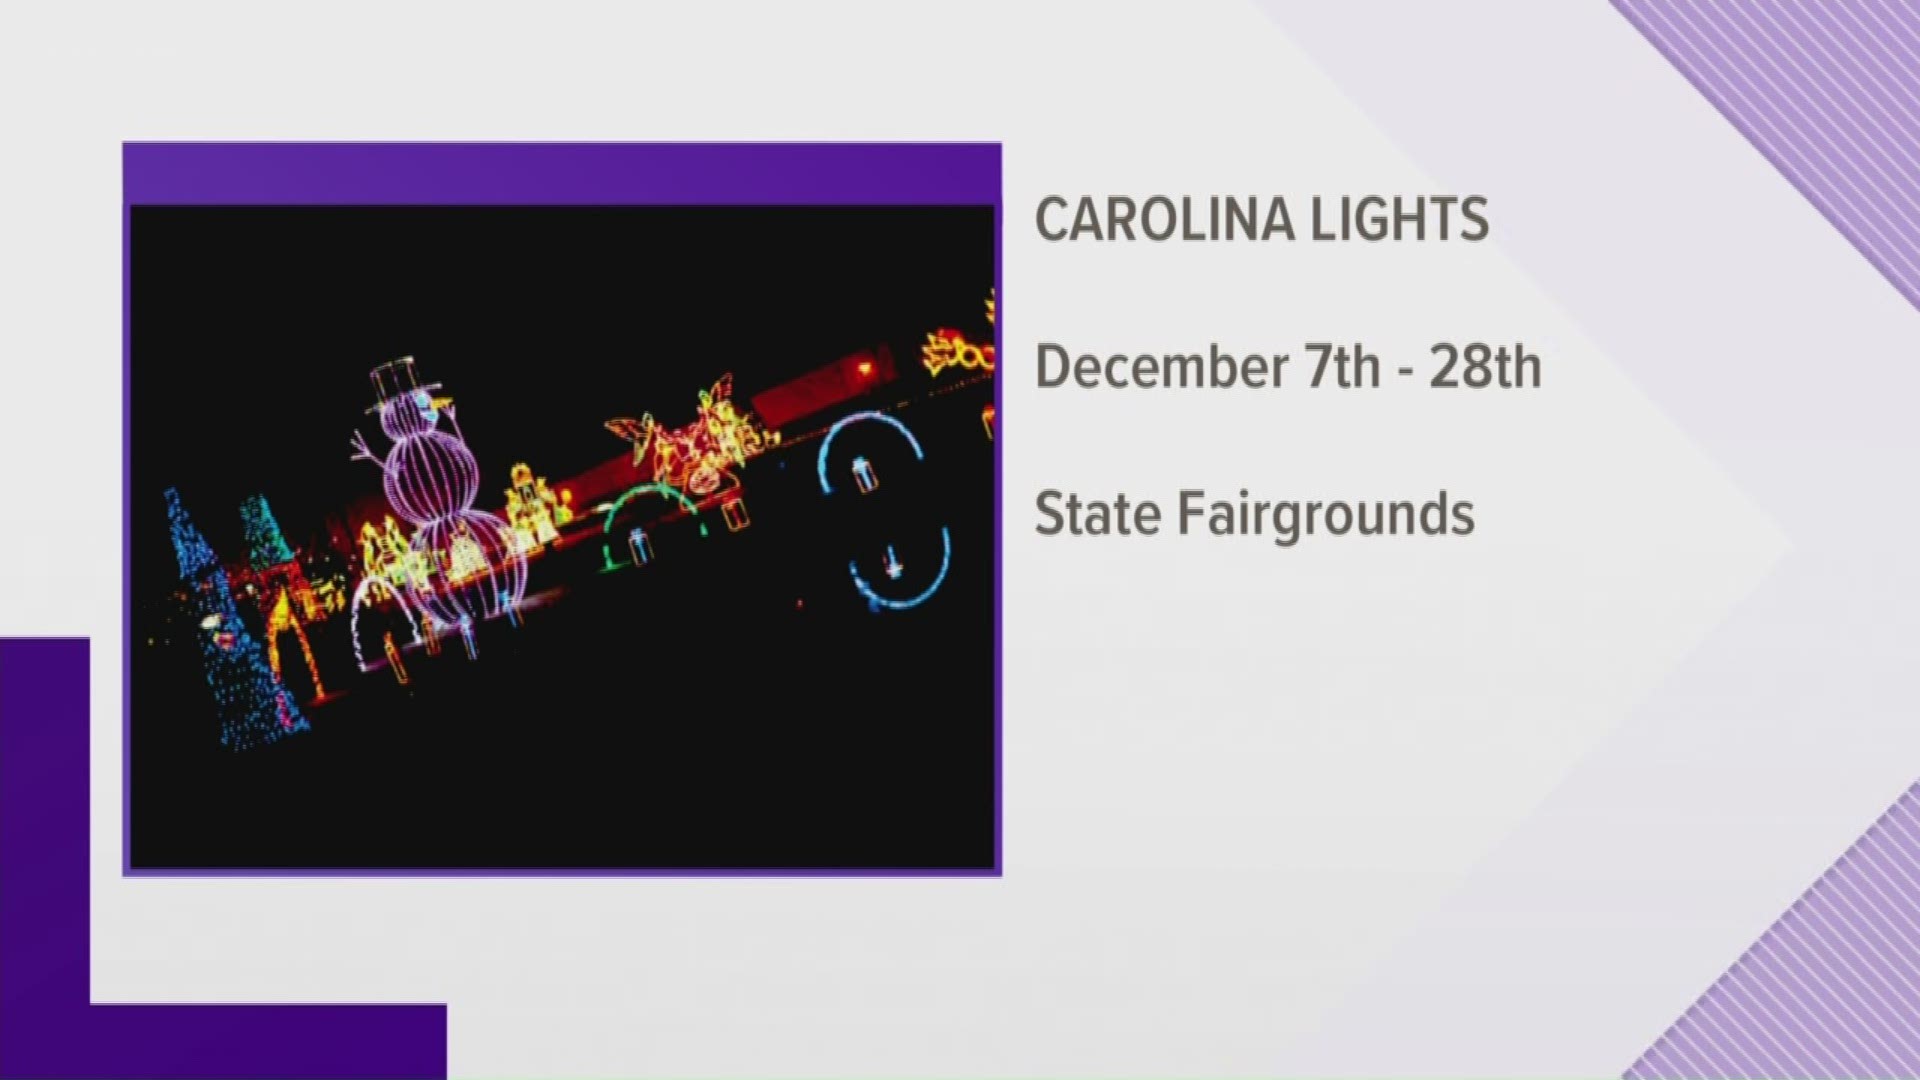 Carolina Lights will feature more than 100 individual LED light displays along a route in the George Rogers Blvd area of the Fairgrounds.